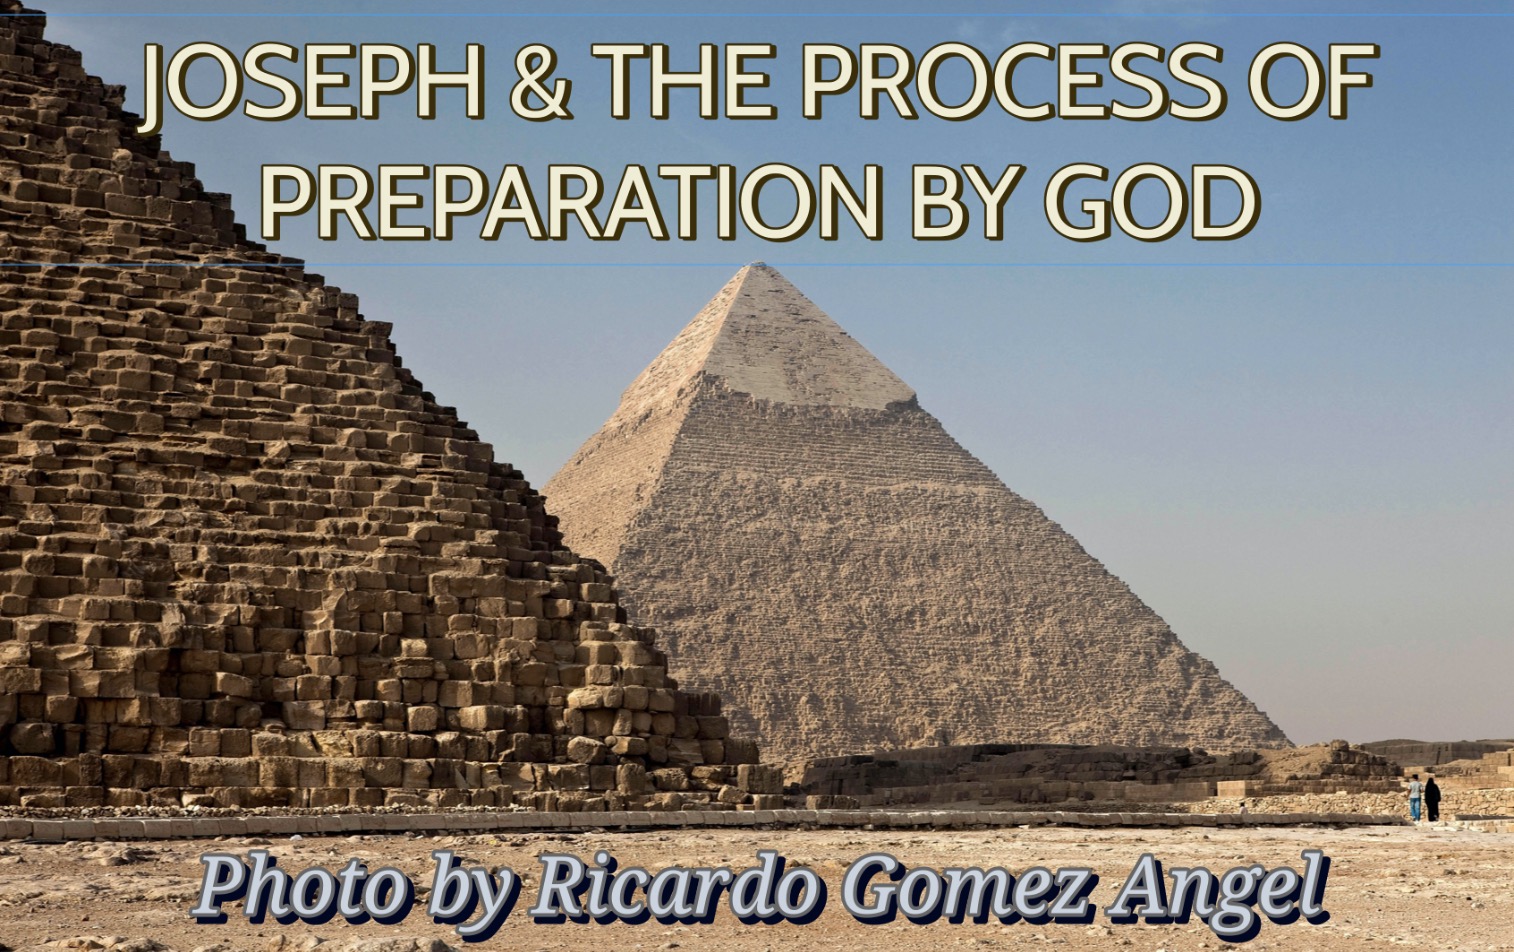 God is more interested in the development of your character than in giving you things. Faith and Confession cannot shorten the process. Joseph & the Process of Preparation by God